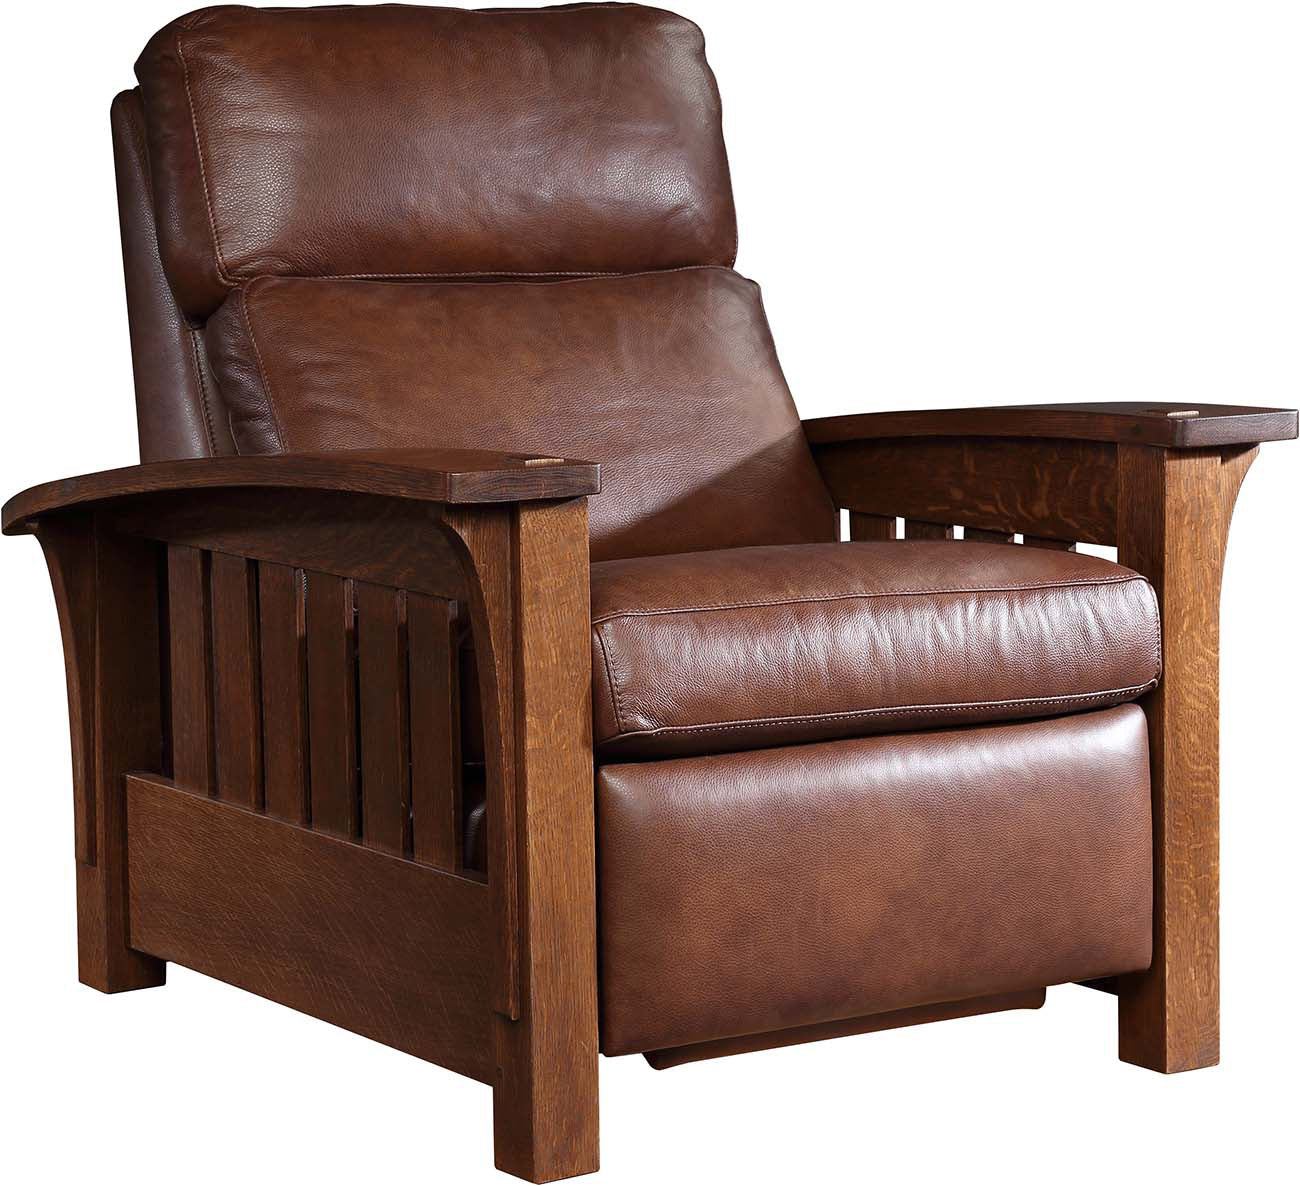 The Mission Power Wall Recliners - Stickley Brand